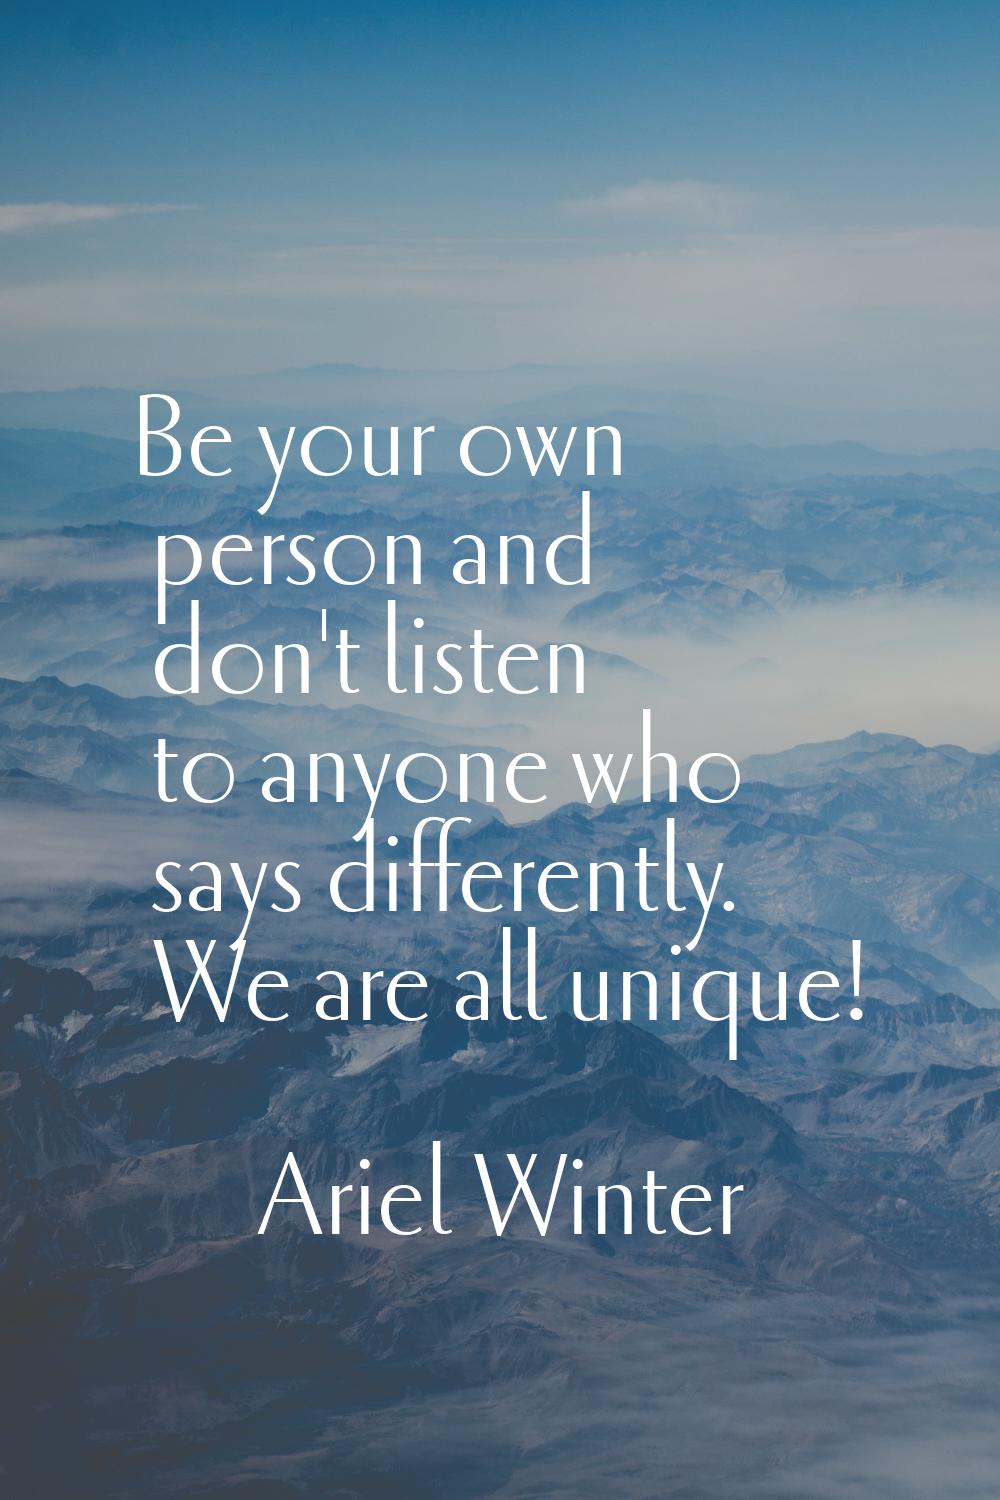 Be your own person and don't listen to anyone who says differently. We are all unique!